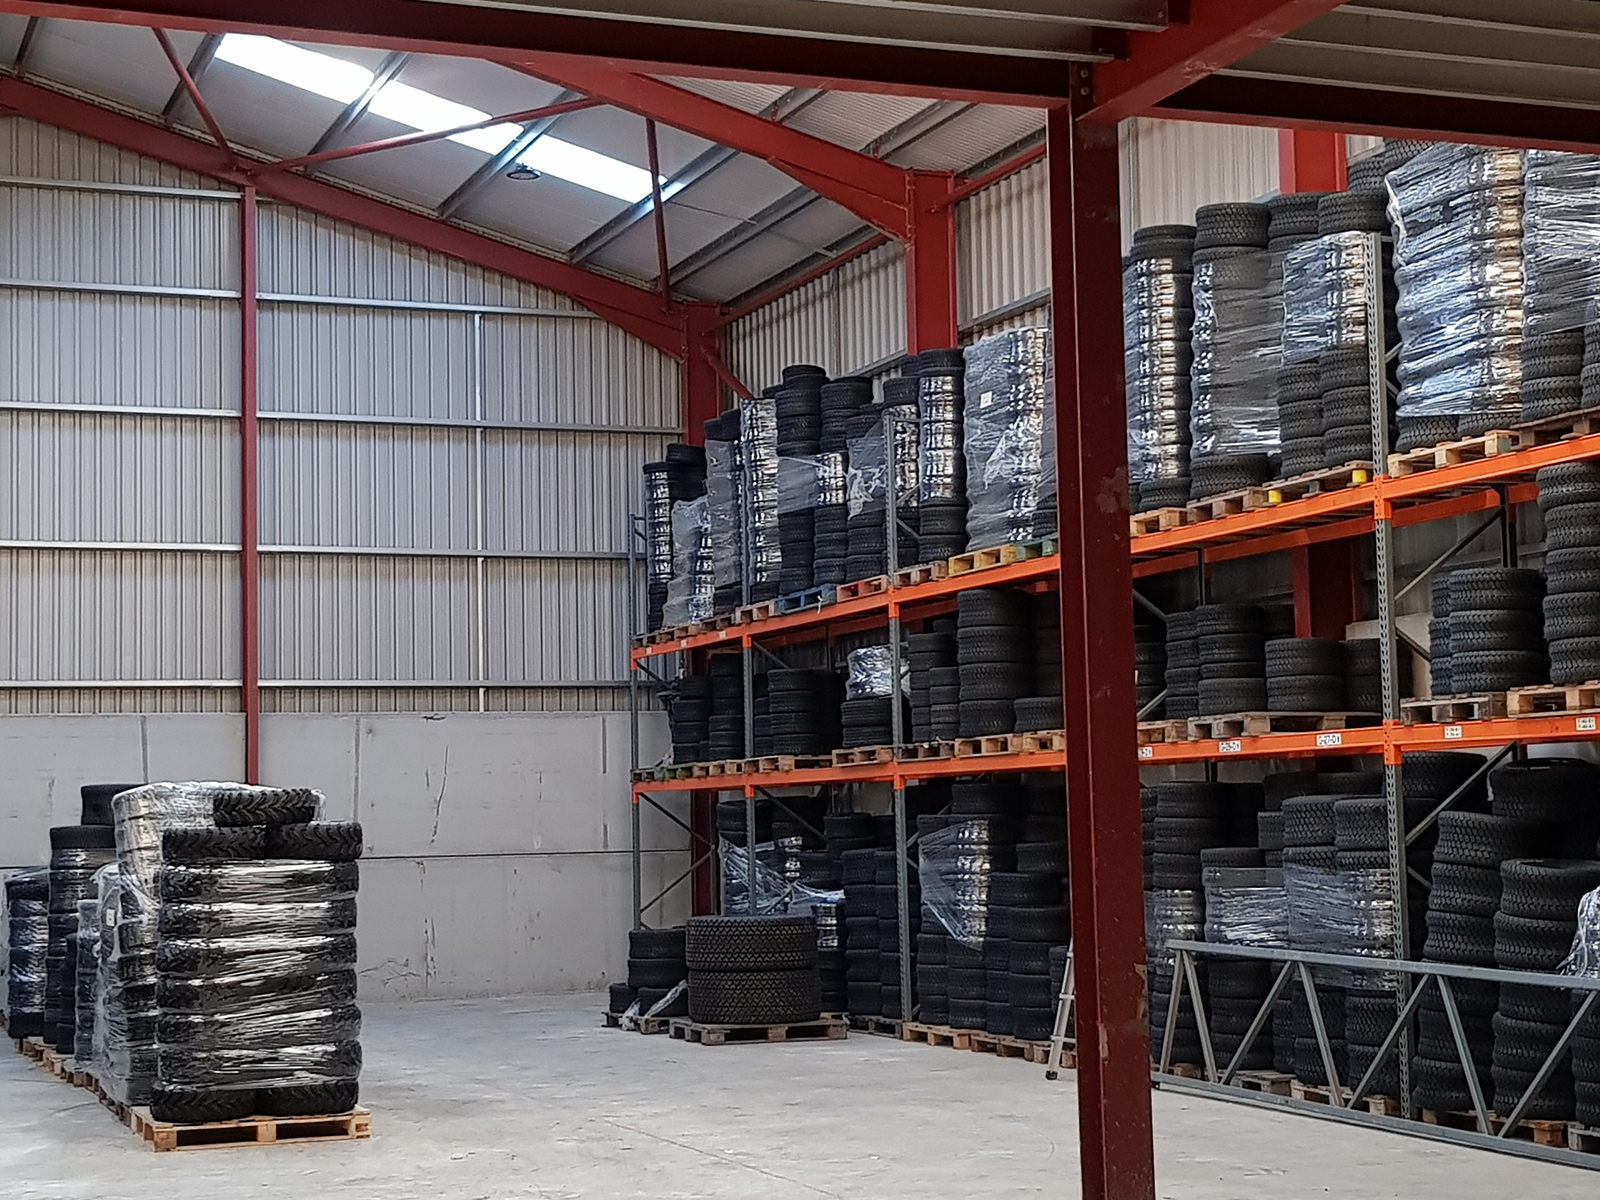 OUR NEW WAREHOUSE IS OPEN FOR BUSINESS!